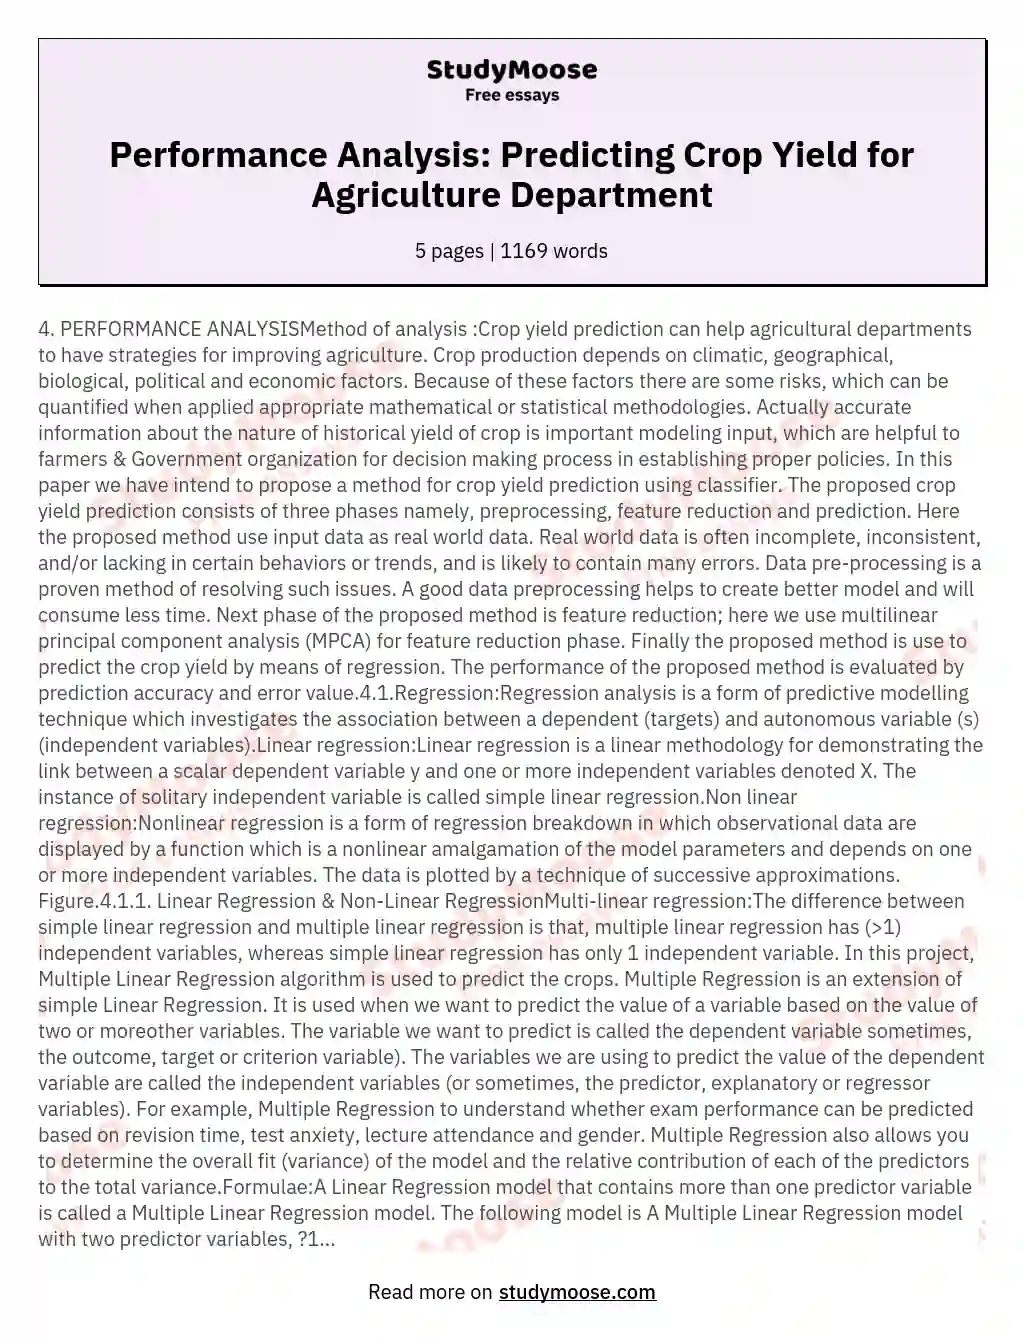 Performance Analysis: Predicting Crop Yield for Agriculture Department essay